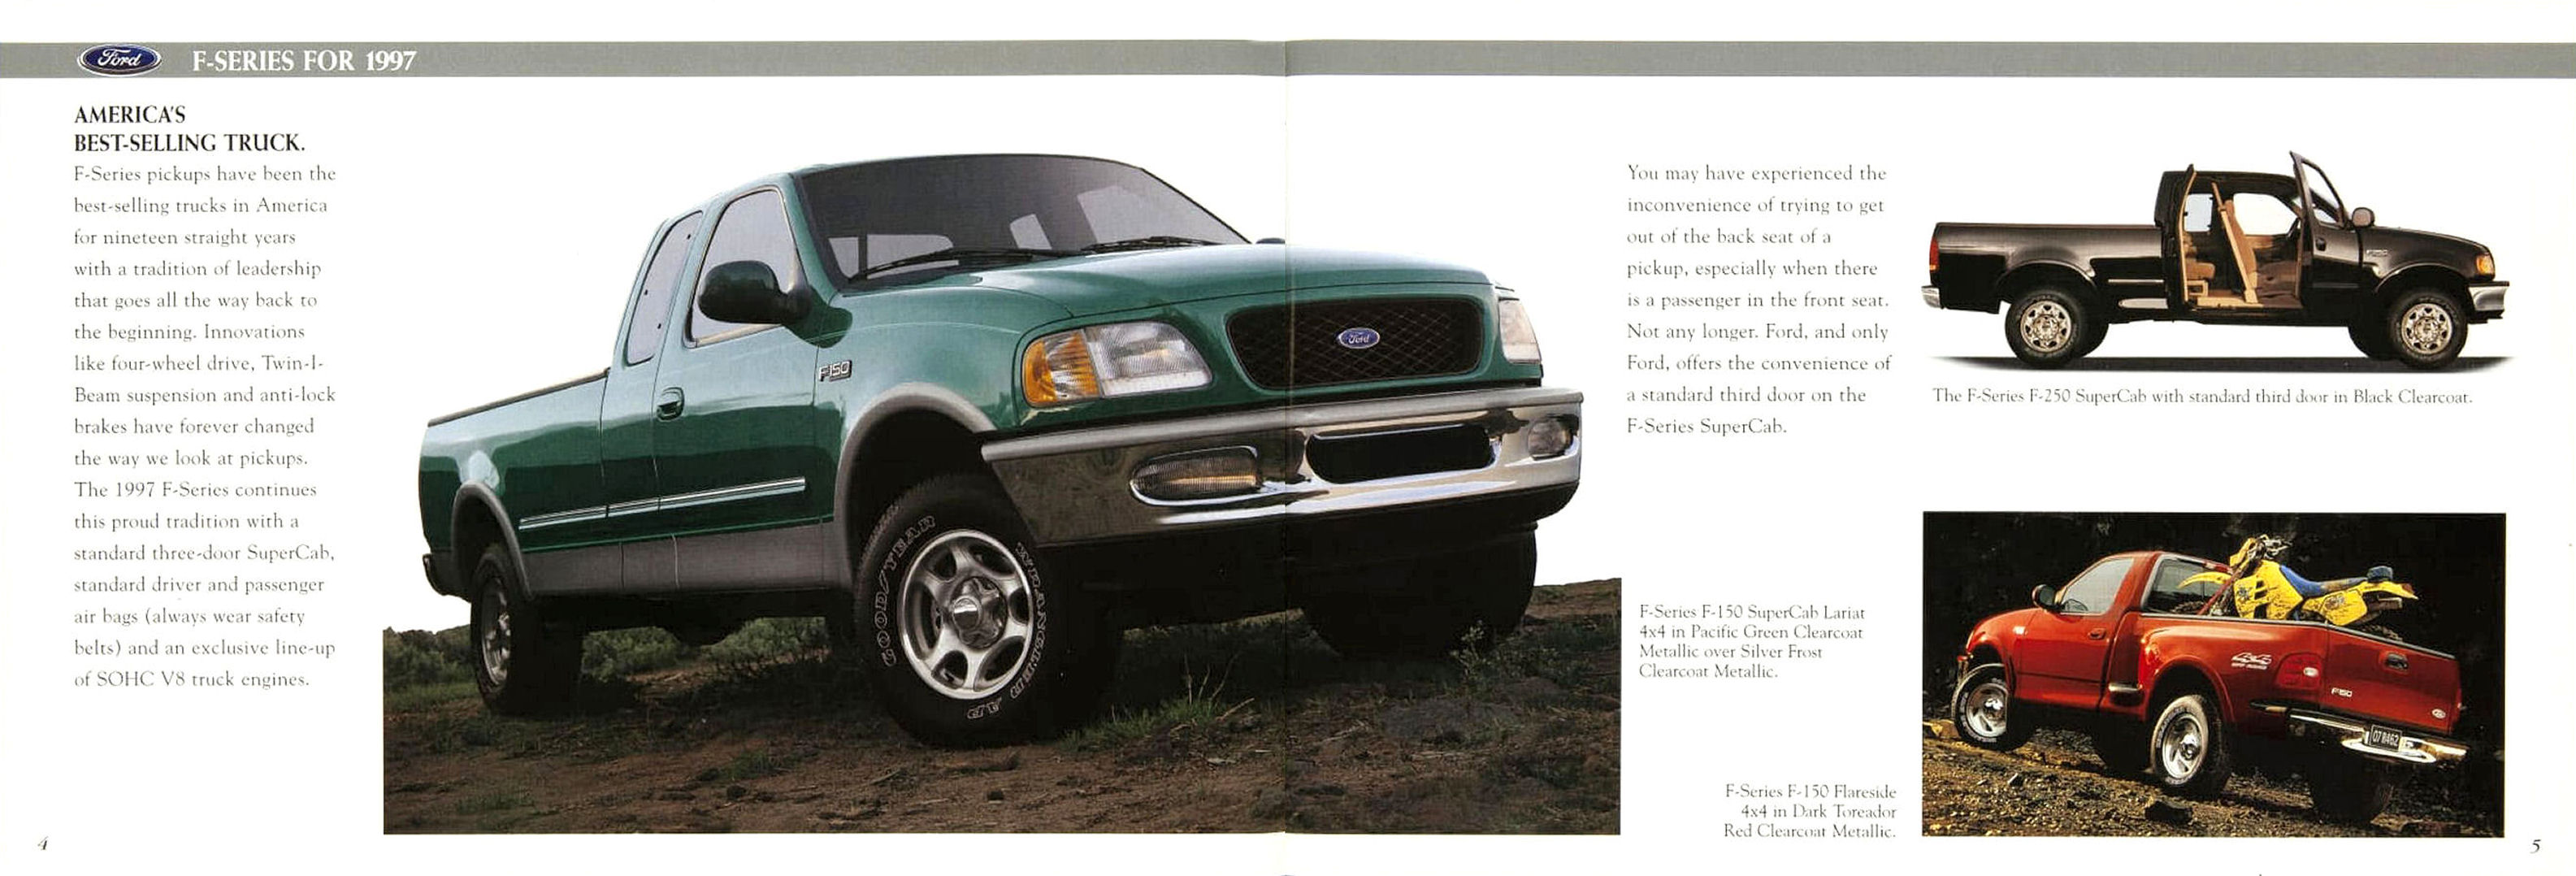 1997_Ford_Cars_and_Trucks_Rev-04-05